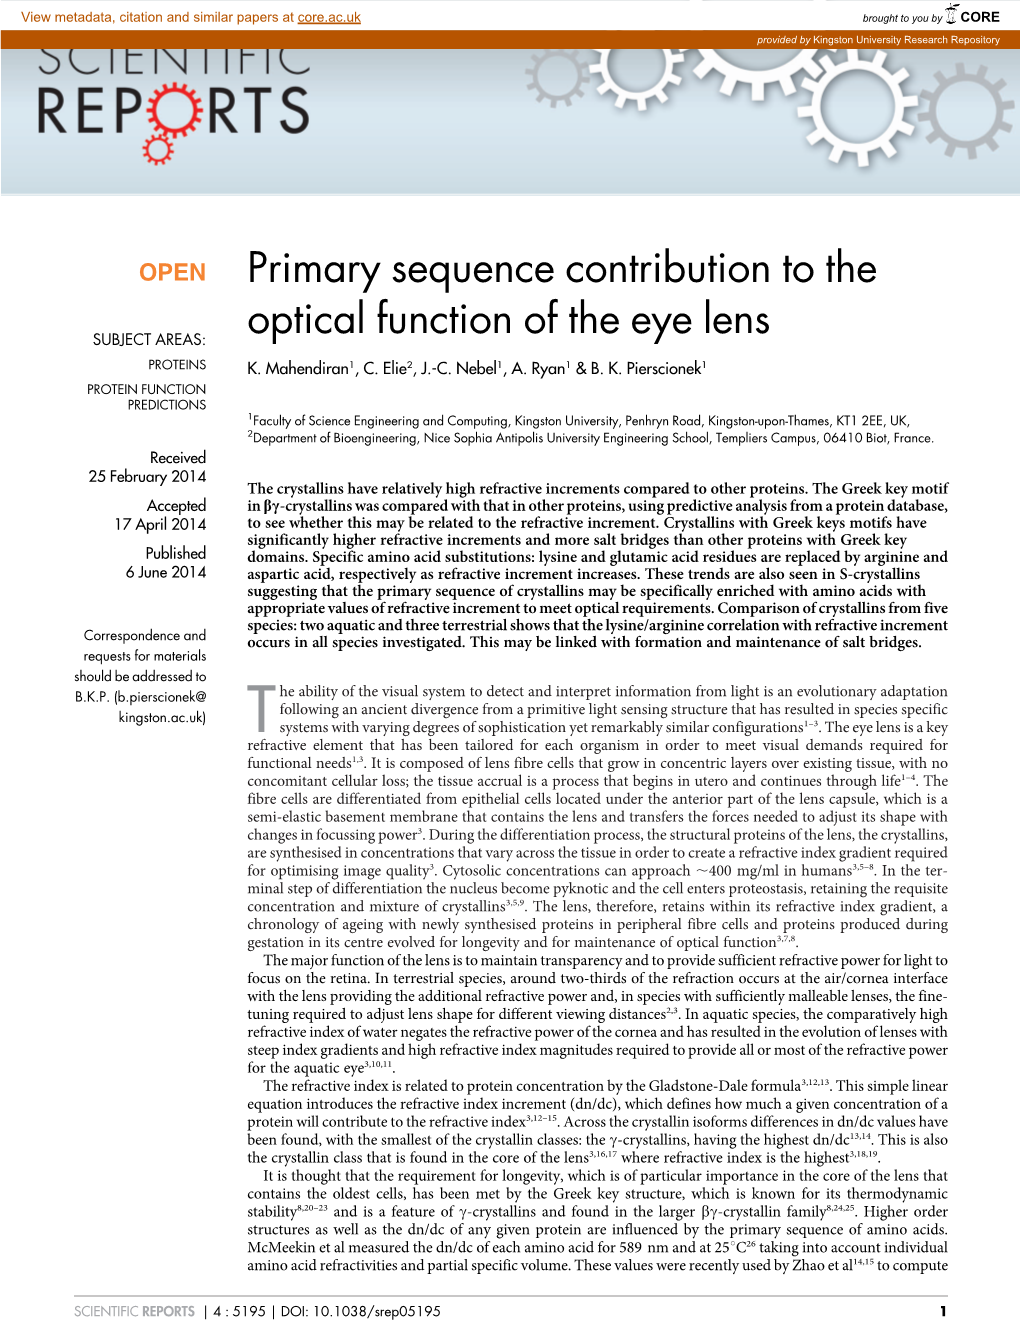 Primary Sequence Contribution to the Optical Function of the Eye Lens